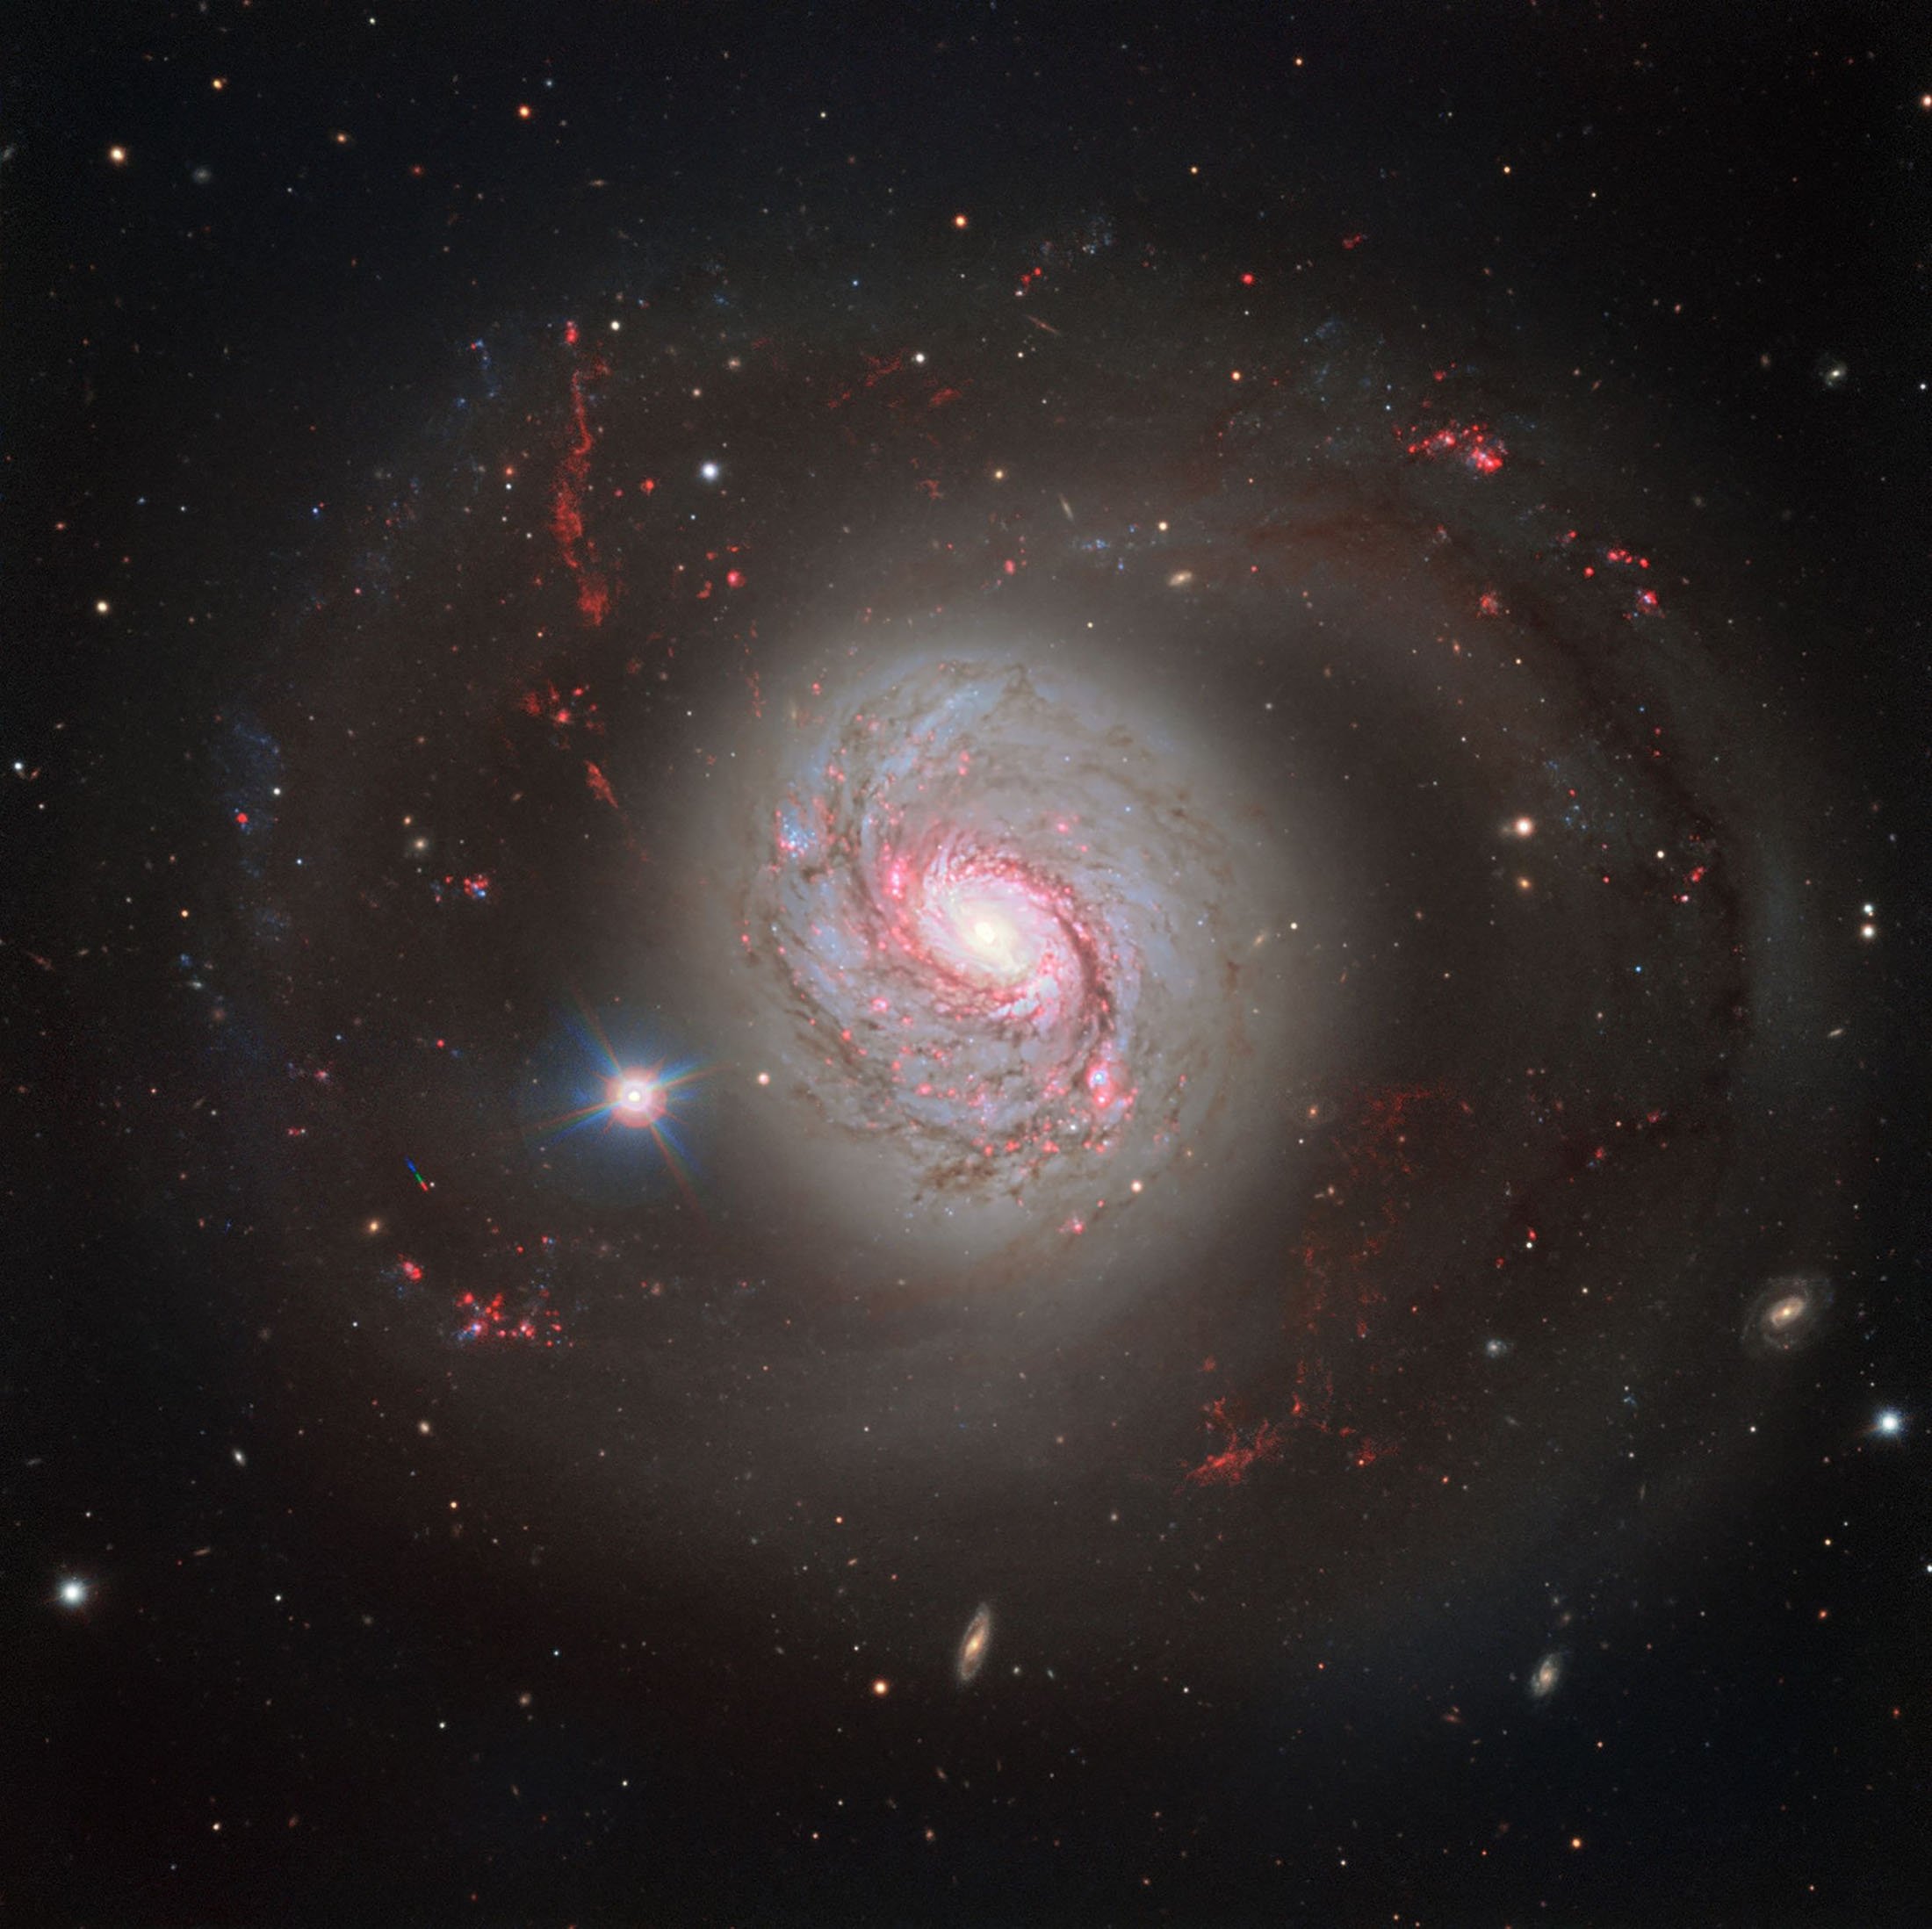 A face-on view of the barred spiral galaxy Messier 77, captured with ESO's Very Large Telescope. (ESO via AFP)